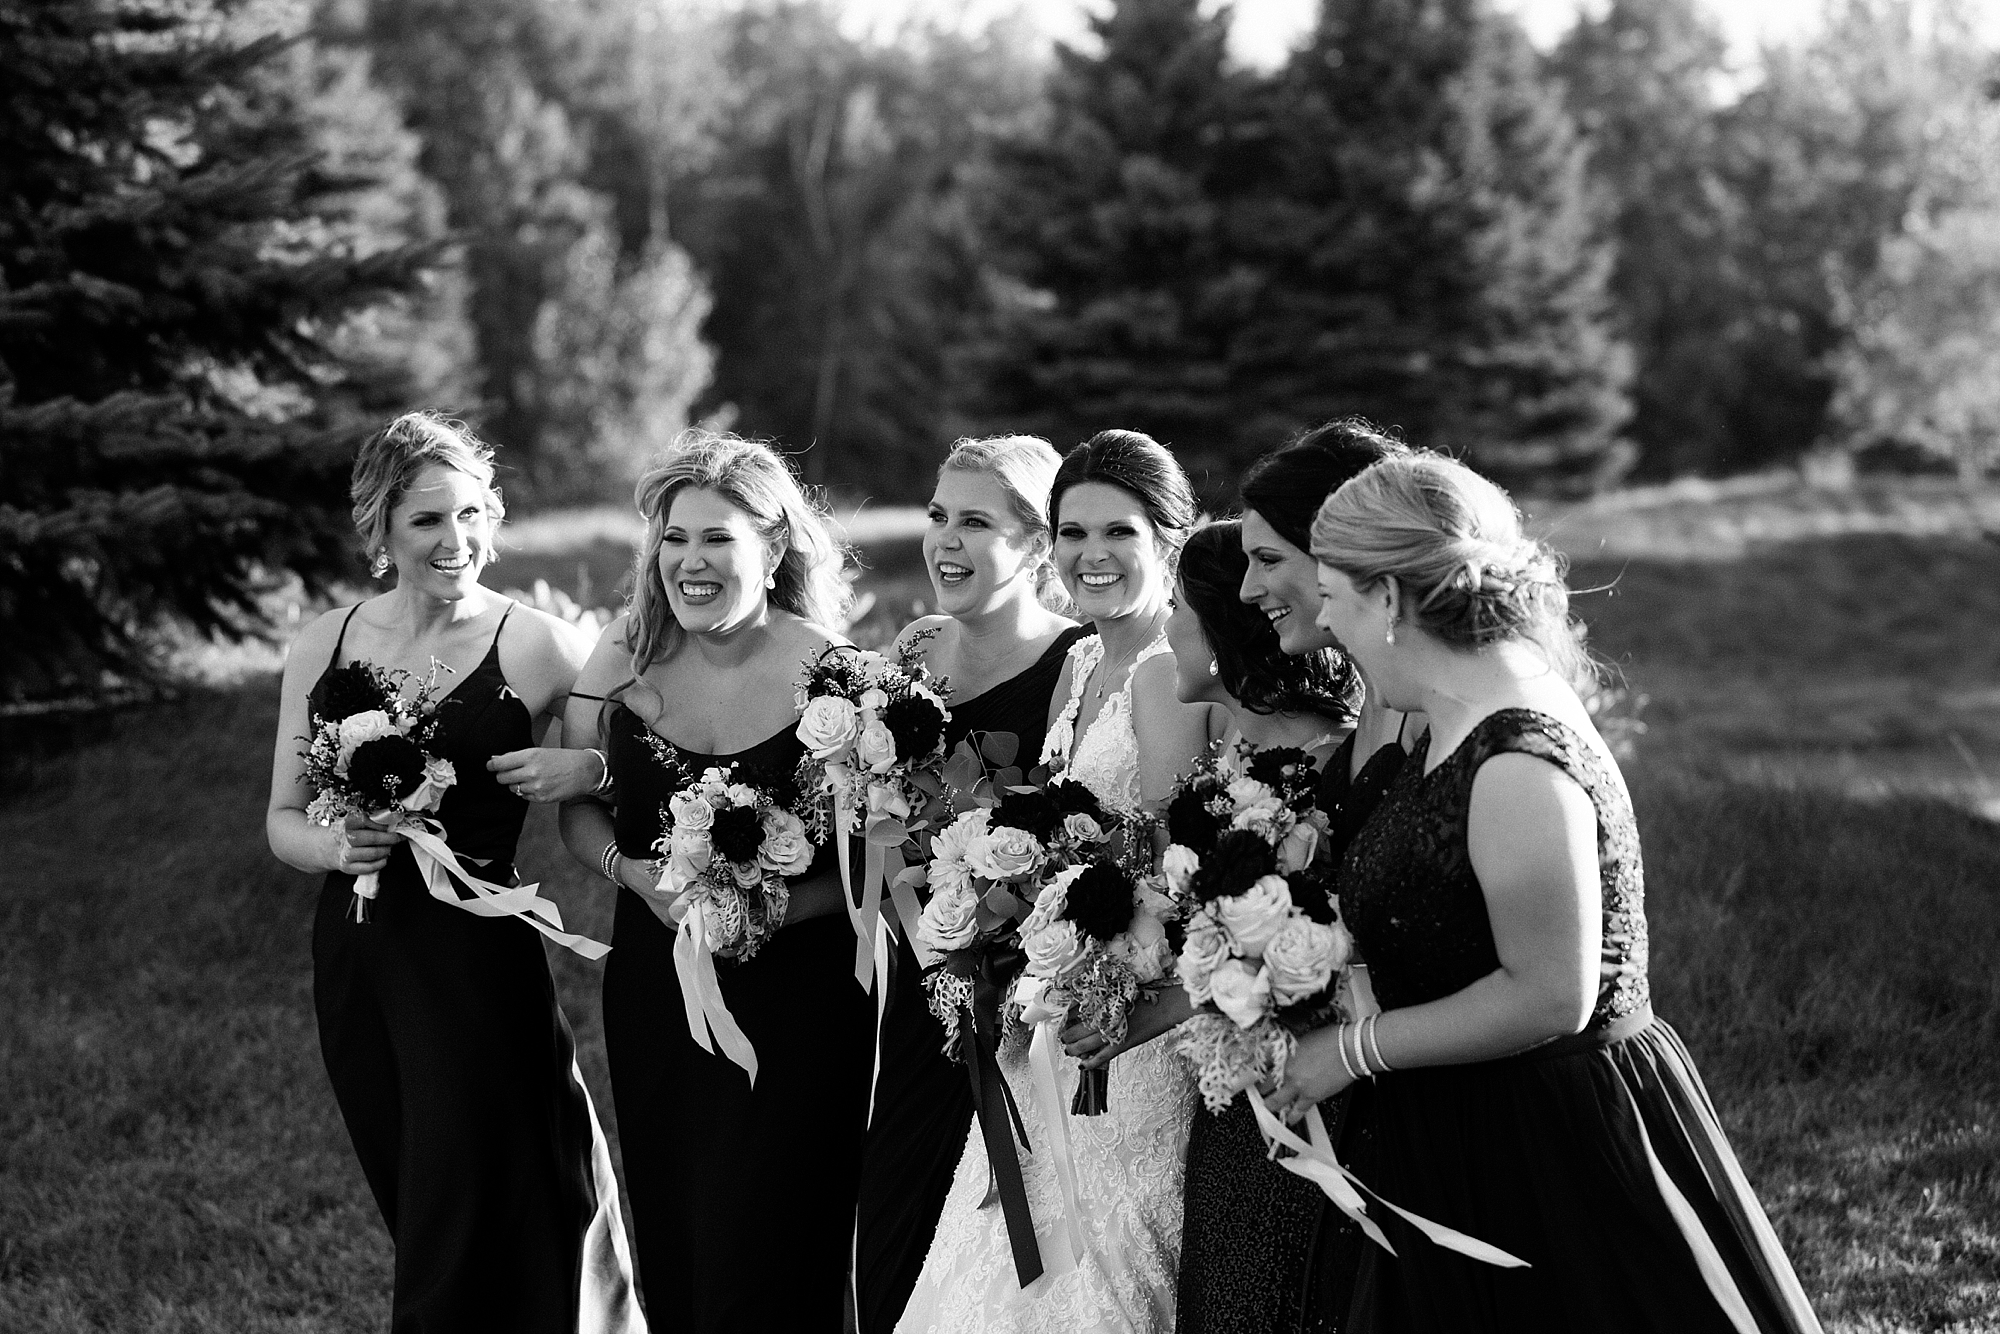 A classic burgundy and navy autumn wedding at Solitude Links in Kimball, Michigan by Breanne Rochelle Photography.